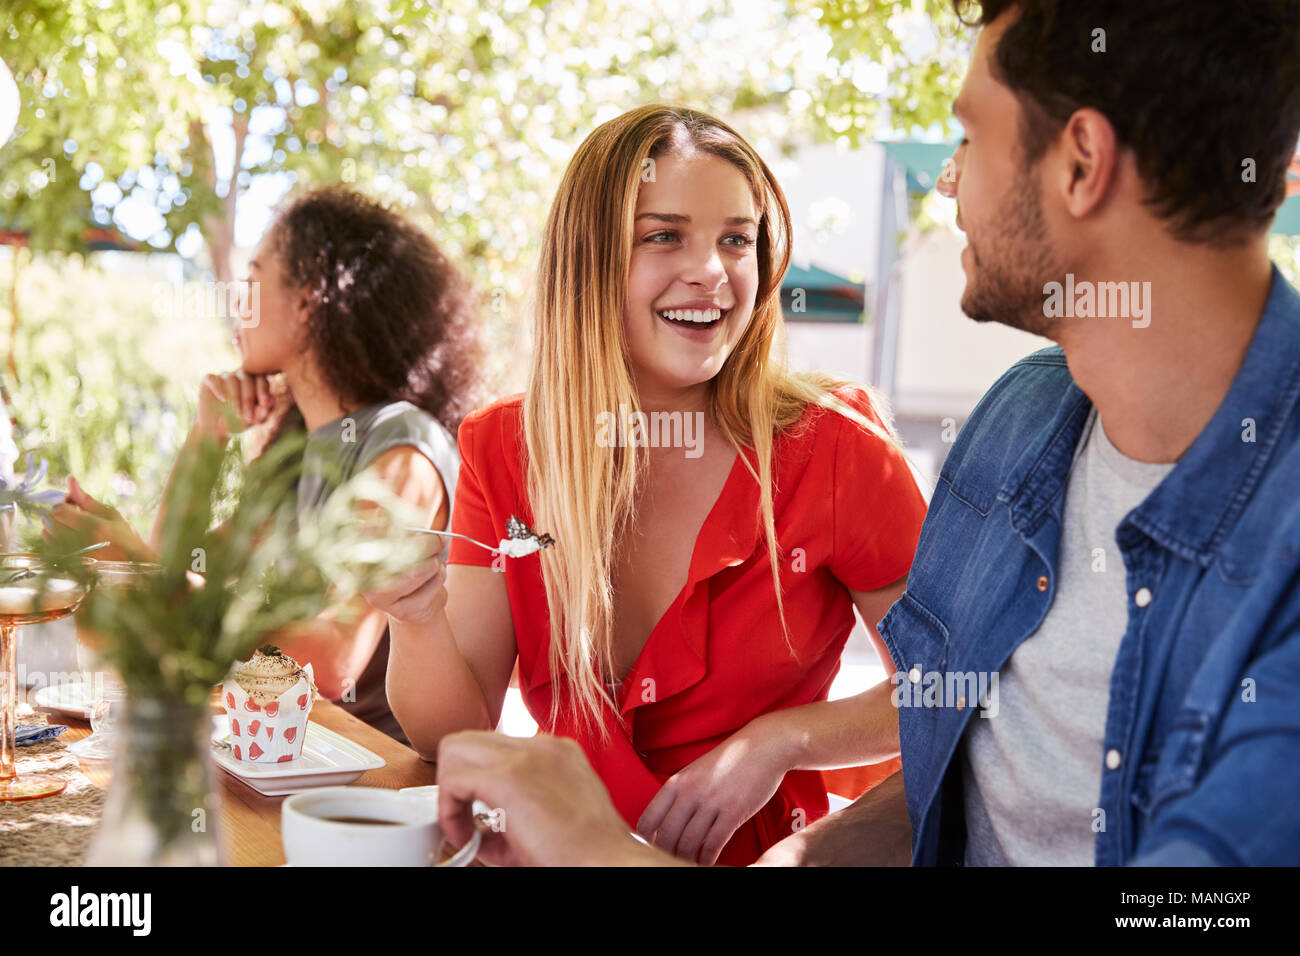 Three young adult friends dining at a table outdoors Stock Photo